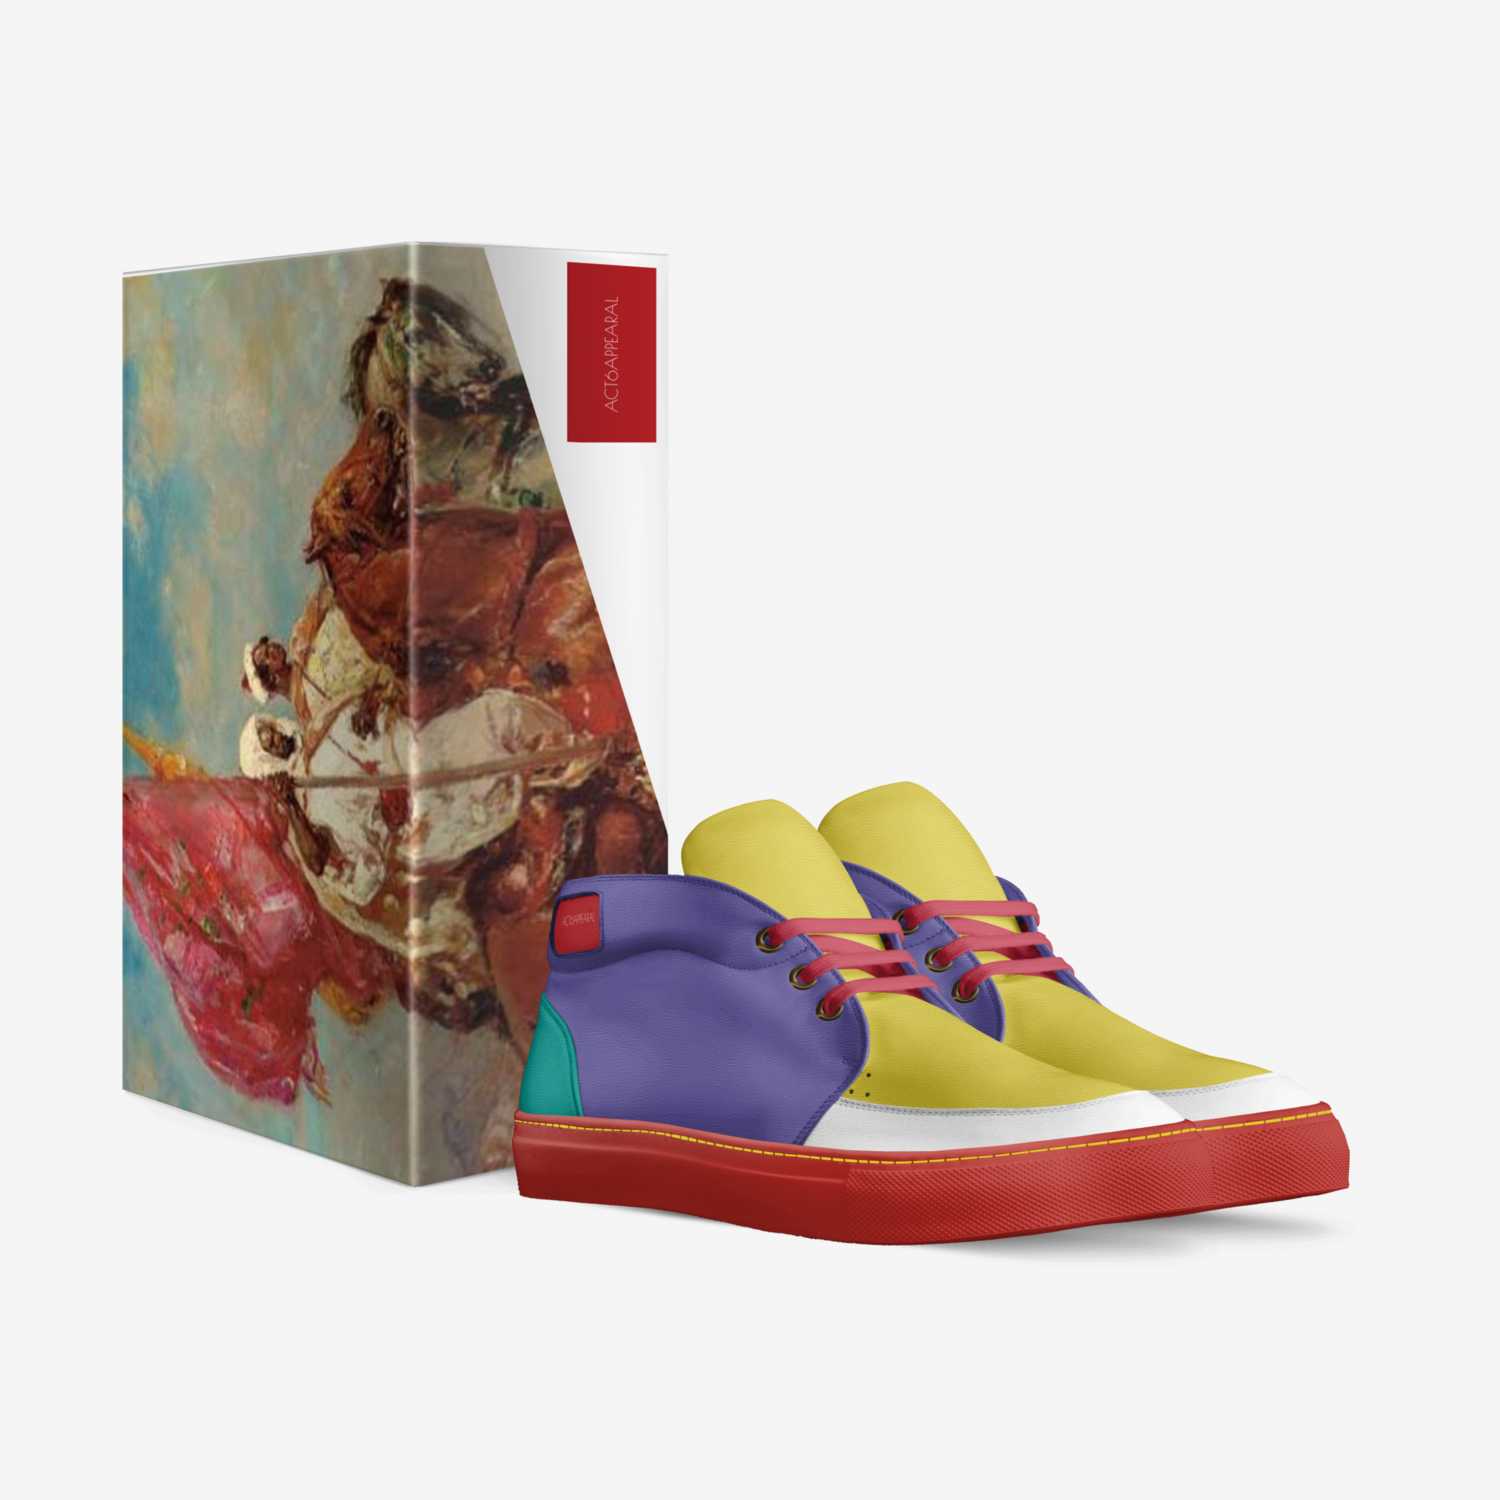 Act6Appearal custom made in Italy shoes by Malchezidek Elshaddai | Box view